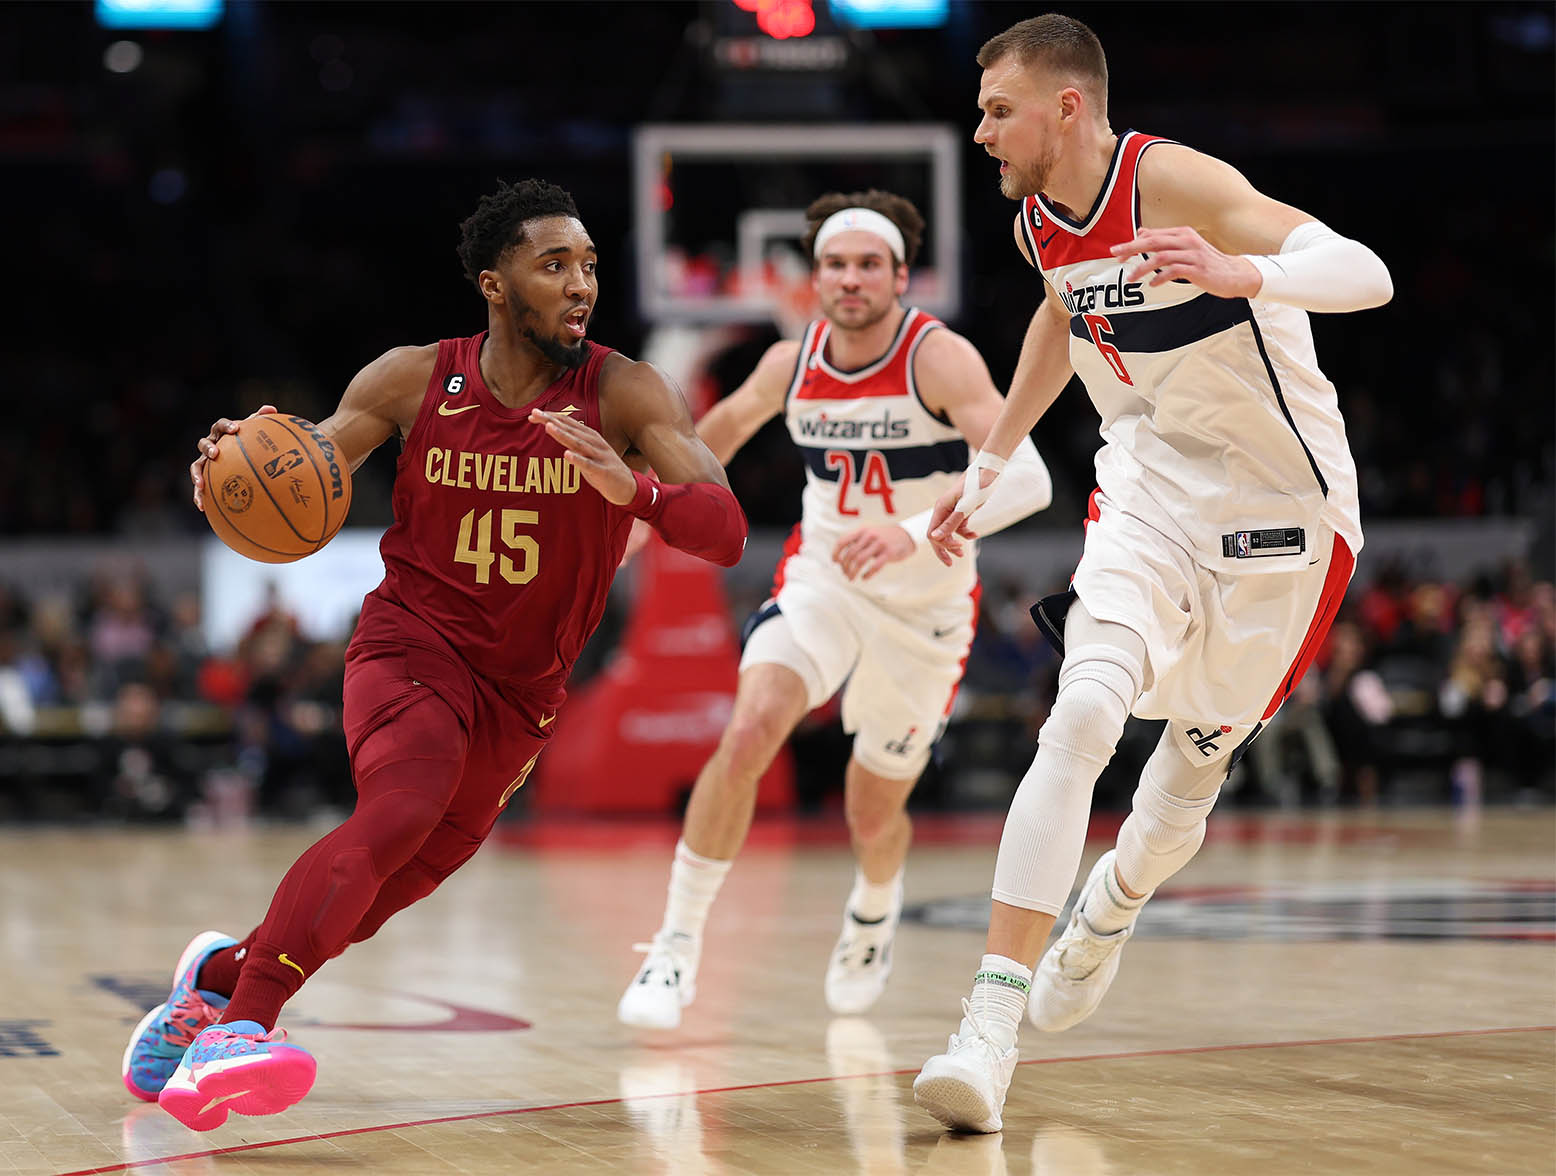 WASHINGTON, DC - FEBRUARY 06: Donovan Mitchell #45 of the Cleveland Cavaliers dribbles past Kristaps Porzingis #6 of the Washington Wizards during the first half at Capital One Arena on February 06, 2023 in Washington, DC. NOTE TO USER: User expressly acknowledges and agrees that, by downloading and or using this photograph, User is consenting to the terms and conditions of the Getty Images License Agreement. (Photo by Patrick Smith/Getty Images)